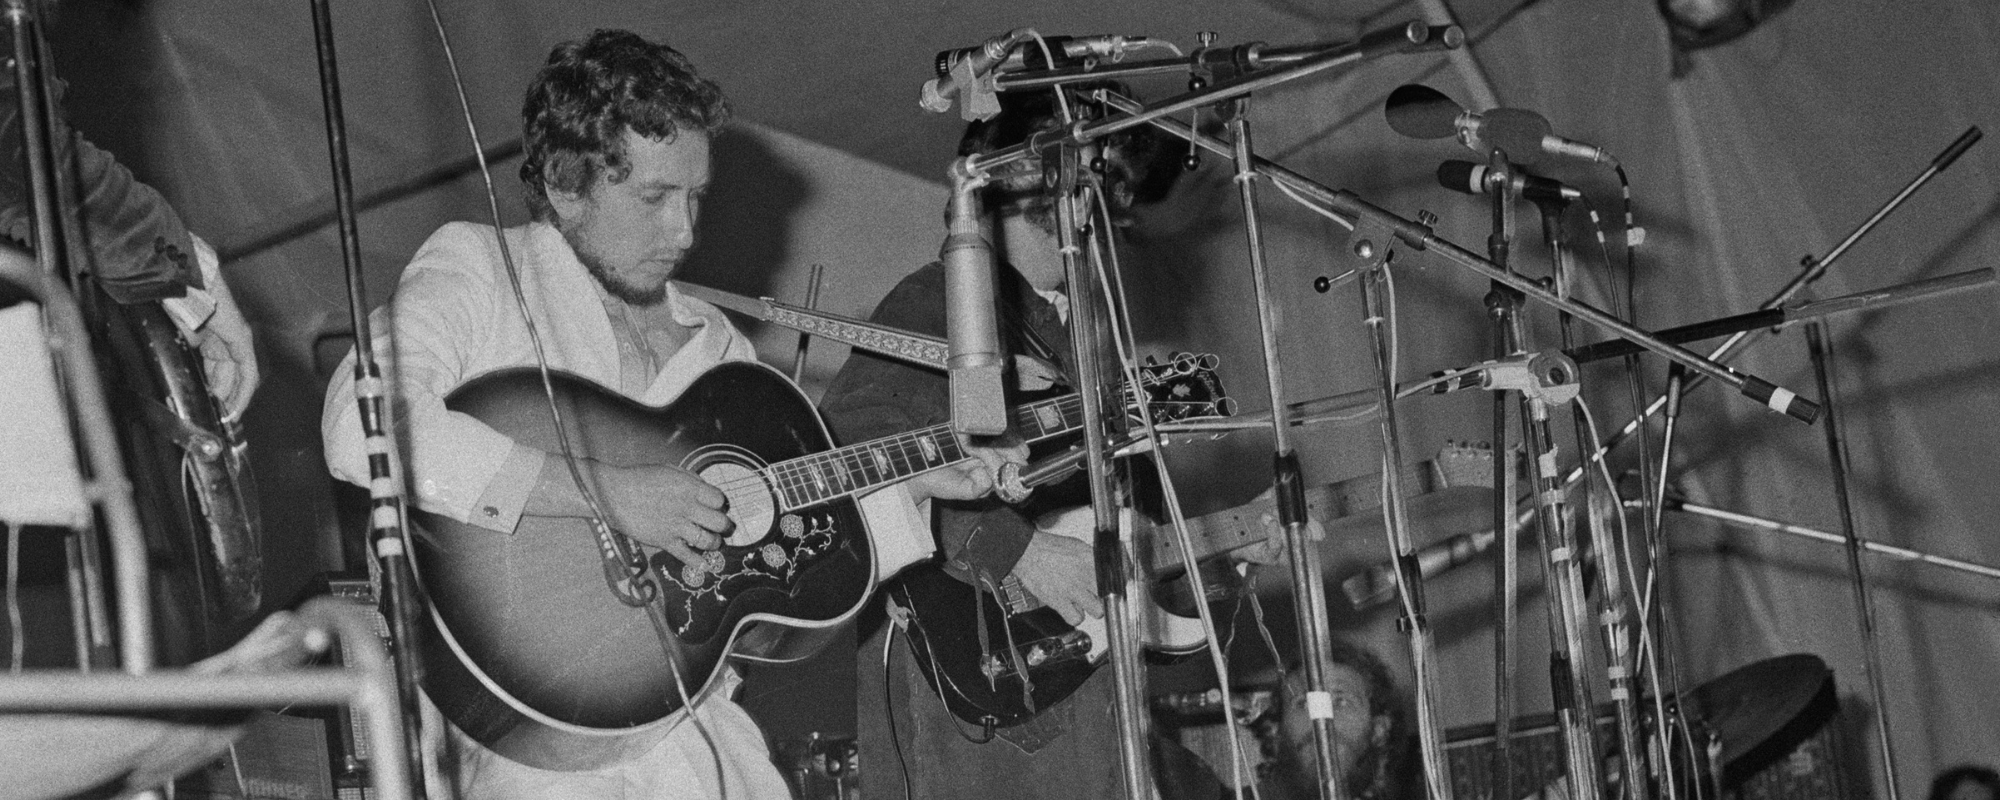 Remembering When Bob Dylan Made It All Official by Starting His Bootleg Series